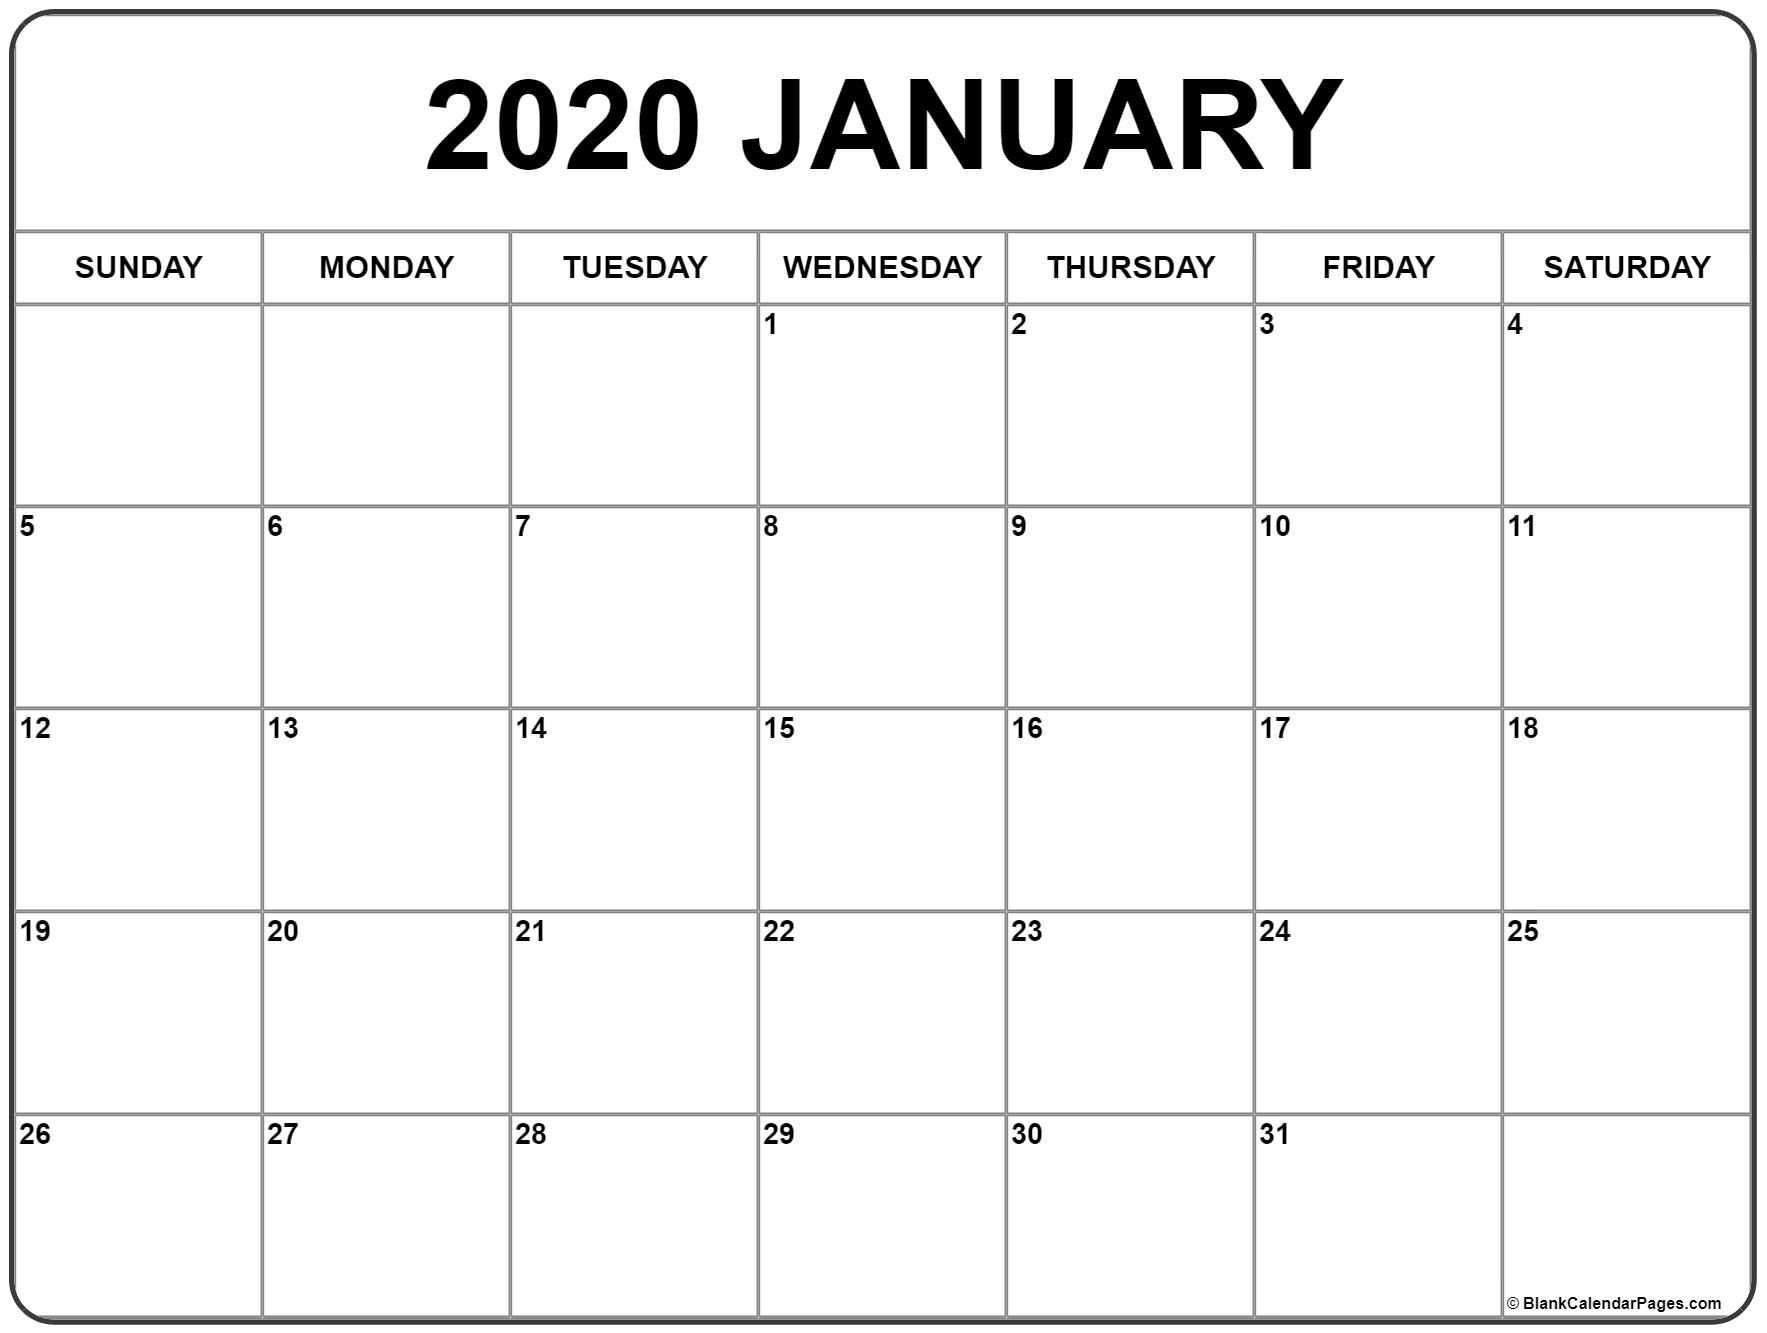 January 2020 Calendar | Free Printable Monthly Calendars-Fill In Monthly Calendar 2020